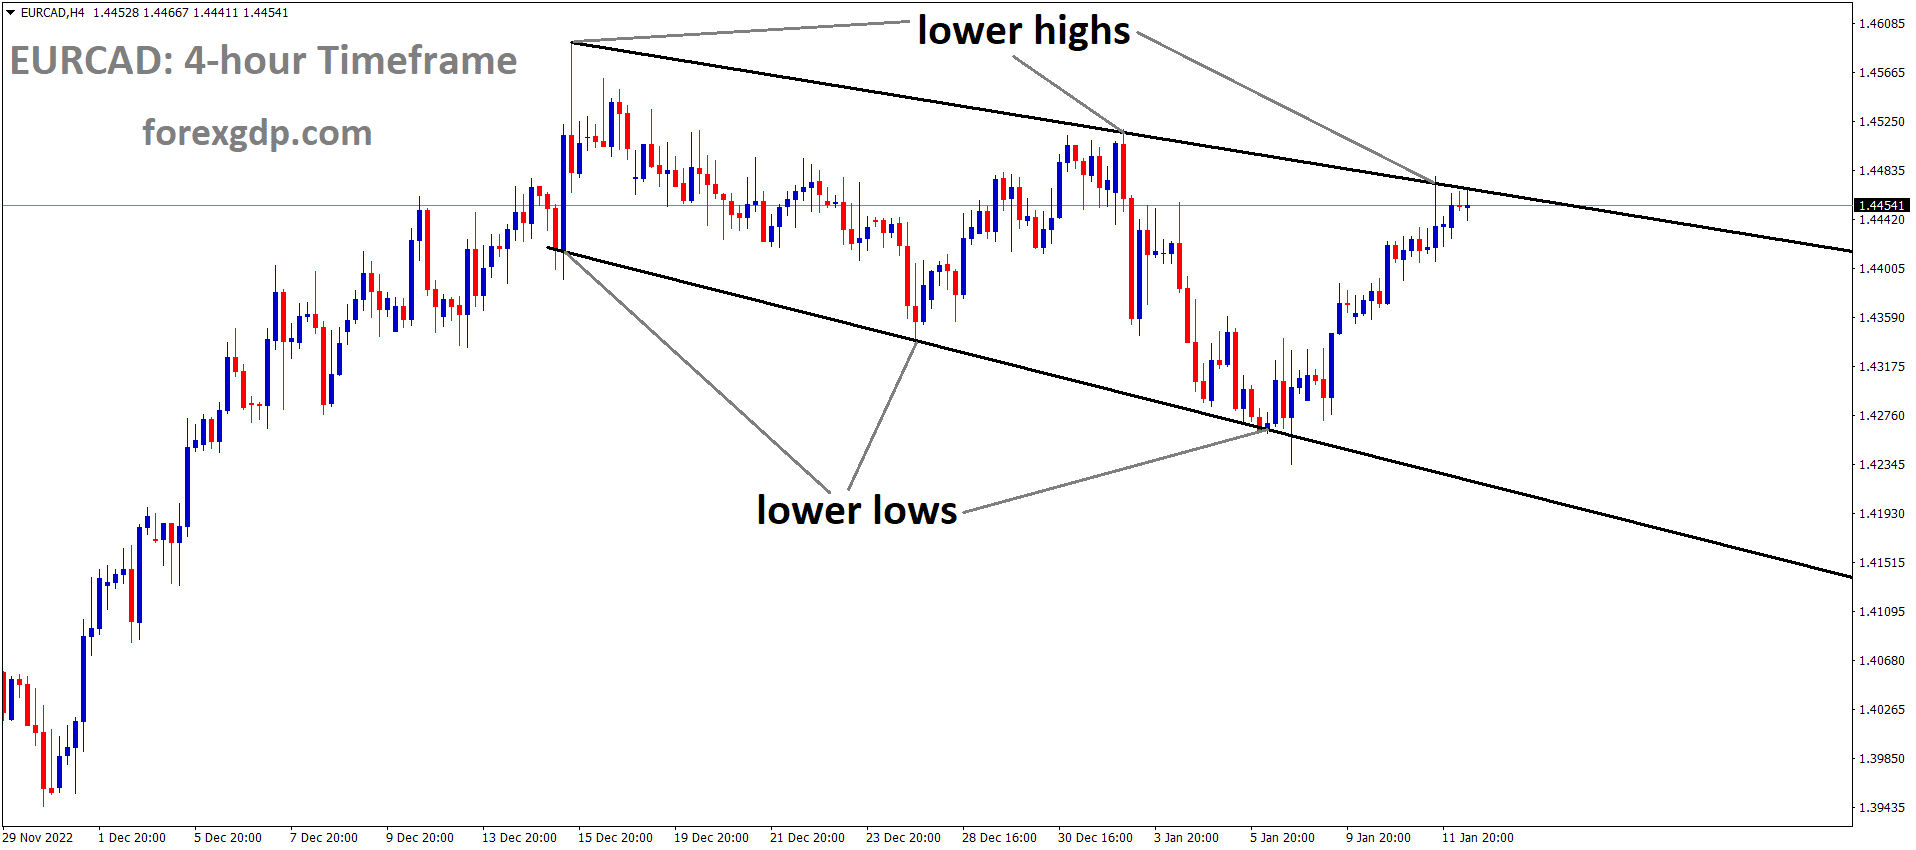 EURCAD is moving in a Descending channel and the market has reached the Lower high area of the channel